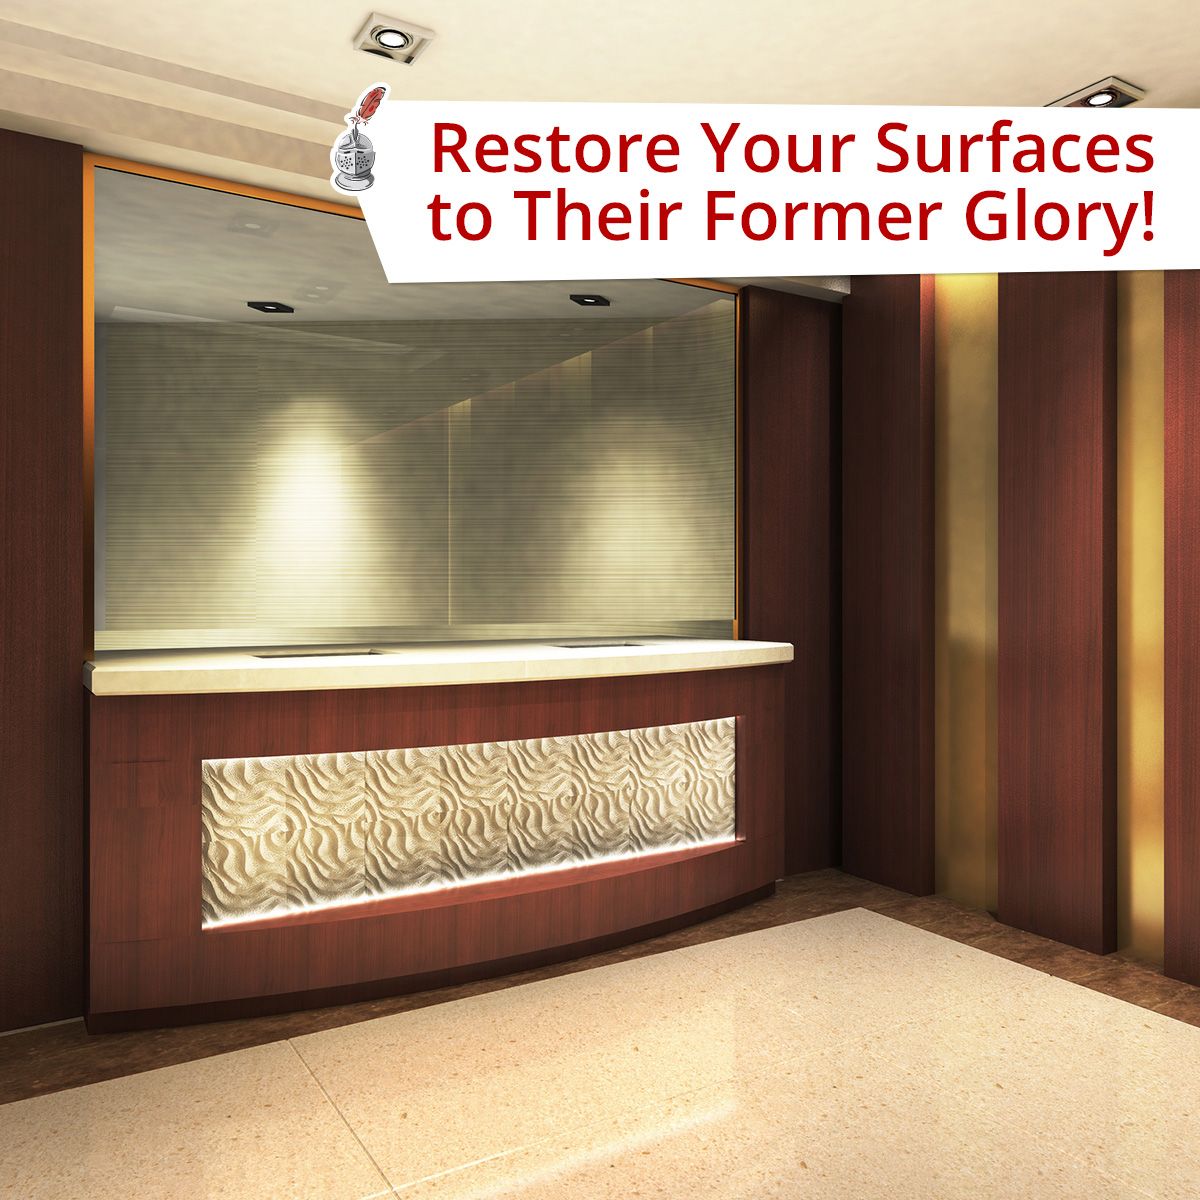 Restore Your Surfaces to Their Former Glory!